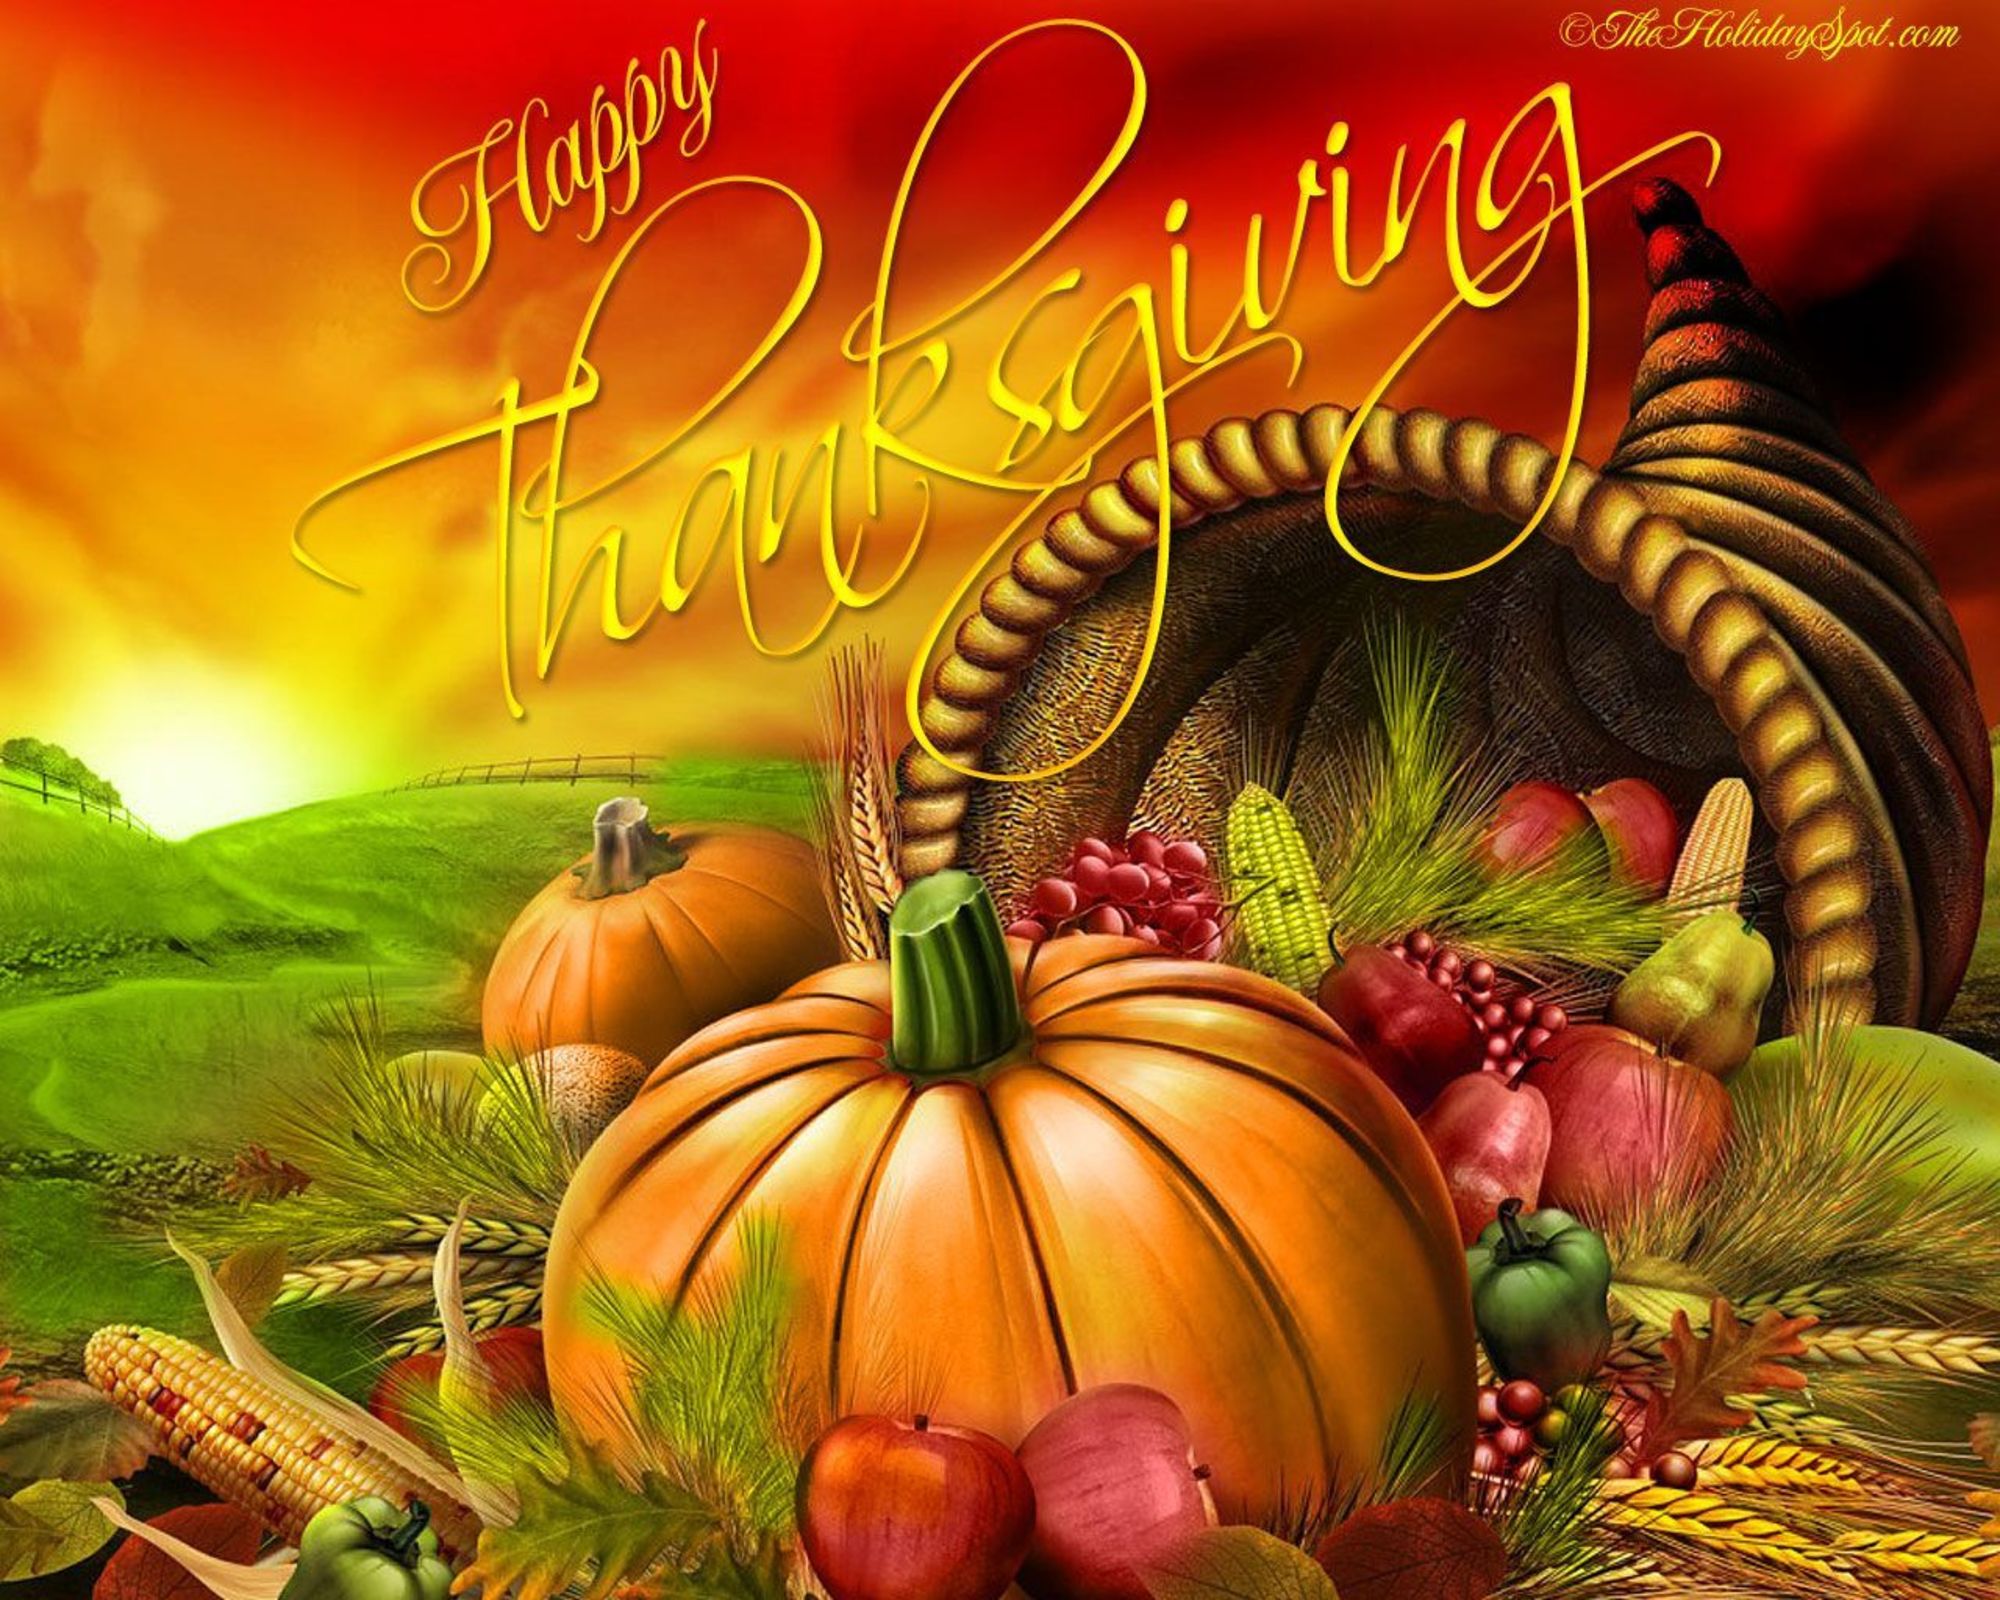 Happy Thanksgiving Day - Happy Thanksgiving Sparkle , HD Wallpaper & Backgrounds